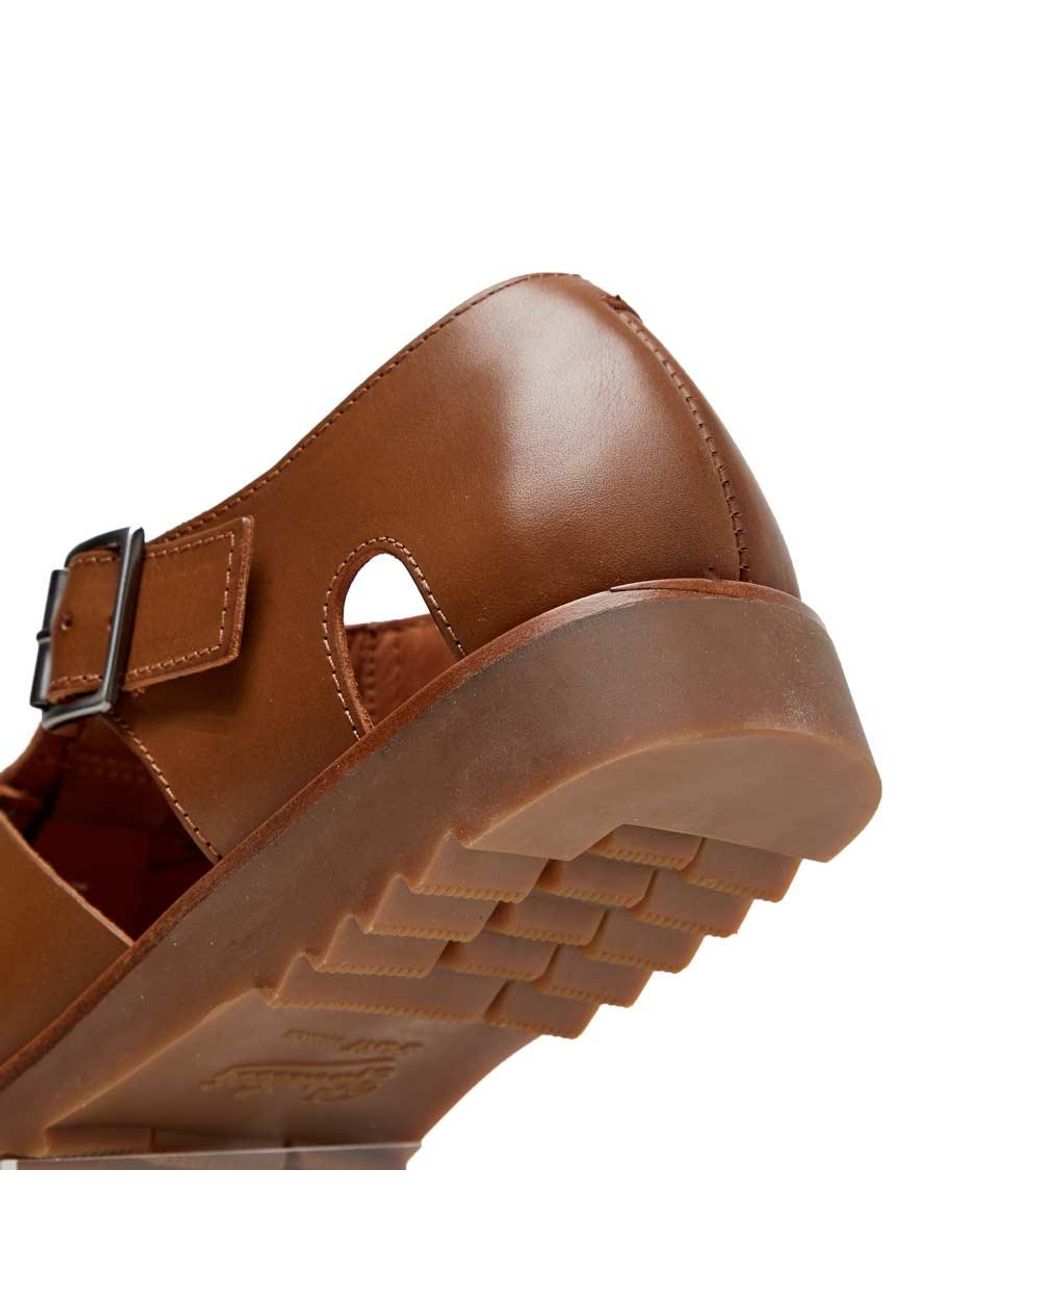 Paraboot Leather Sandals Pacific Sport in Brown for Men - Save 4 